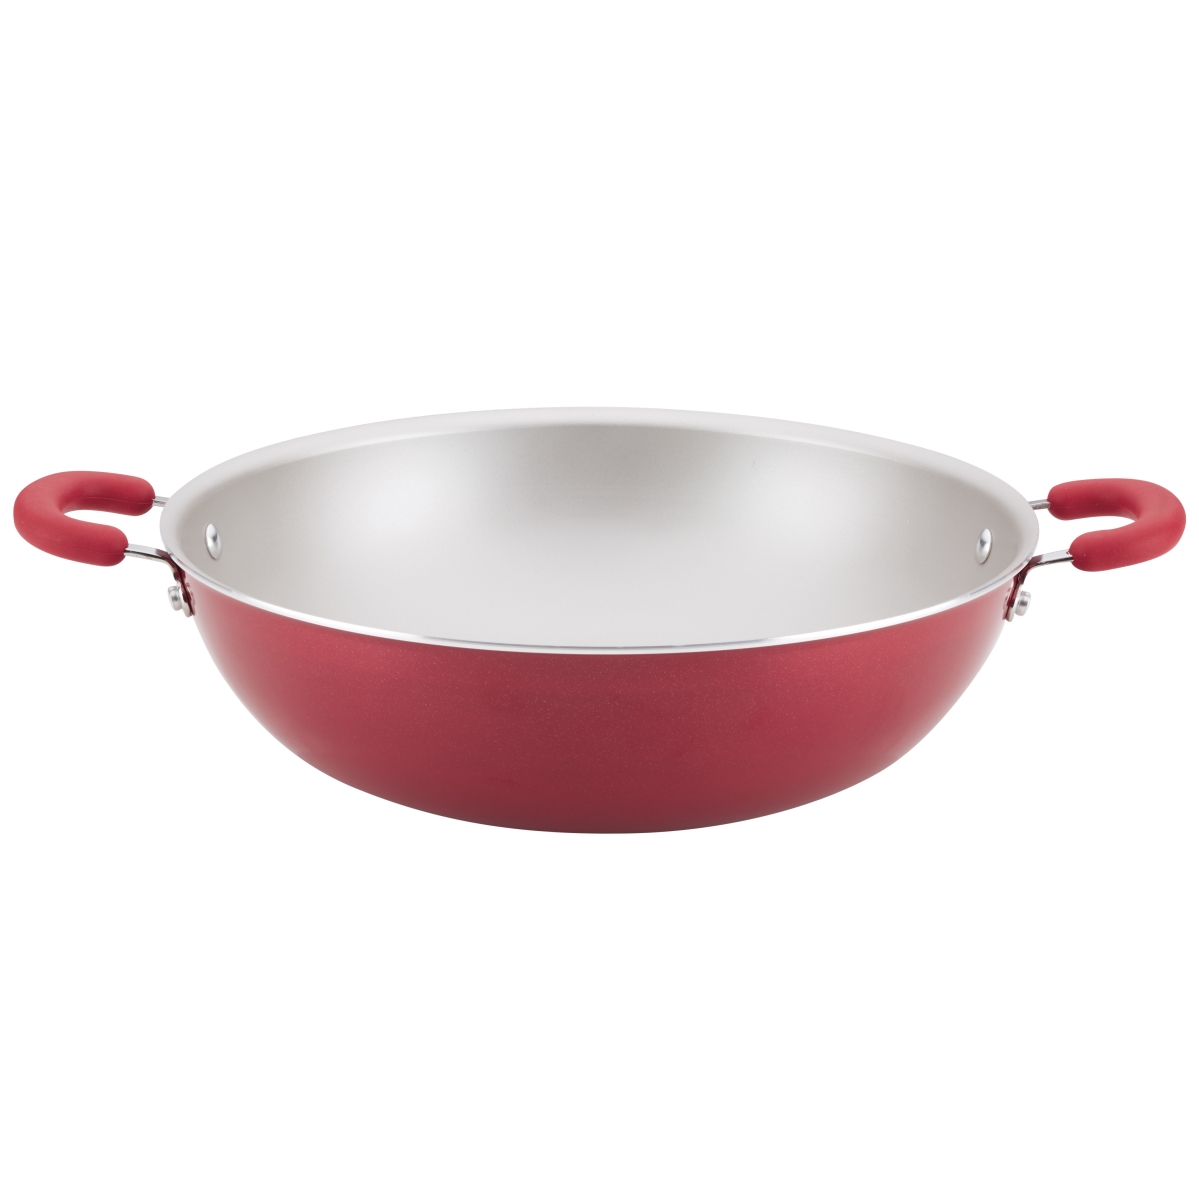 Picture of Rachael Ray 12161 14.25 in. Create Delicious Aluminum Nonstick Wok - Red Shimmer